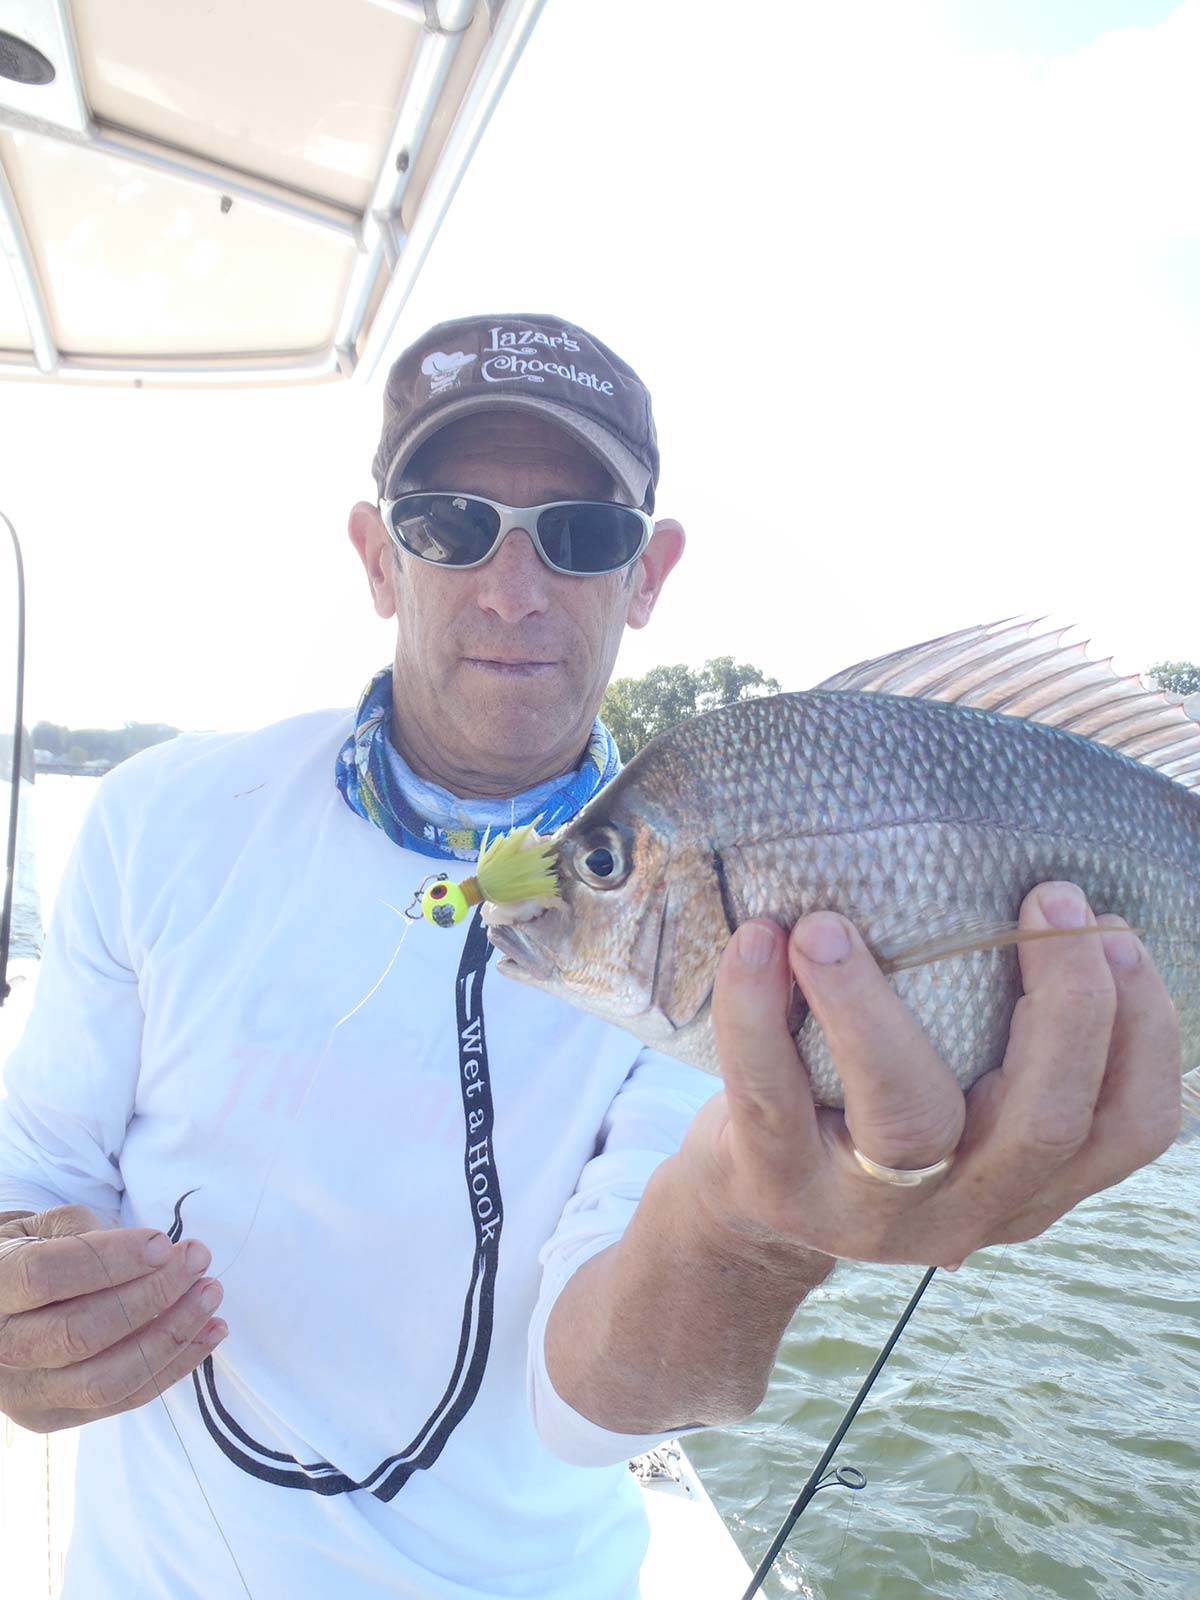 Product Review: Penn Authority & Fathom II - The Fisherman